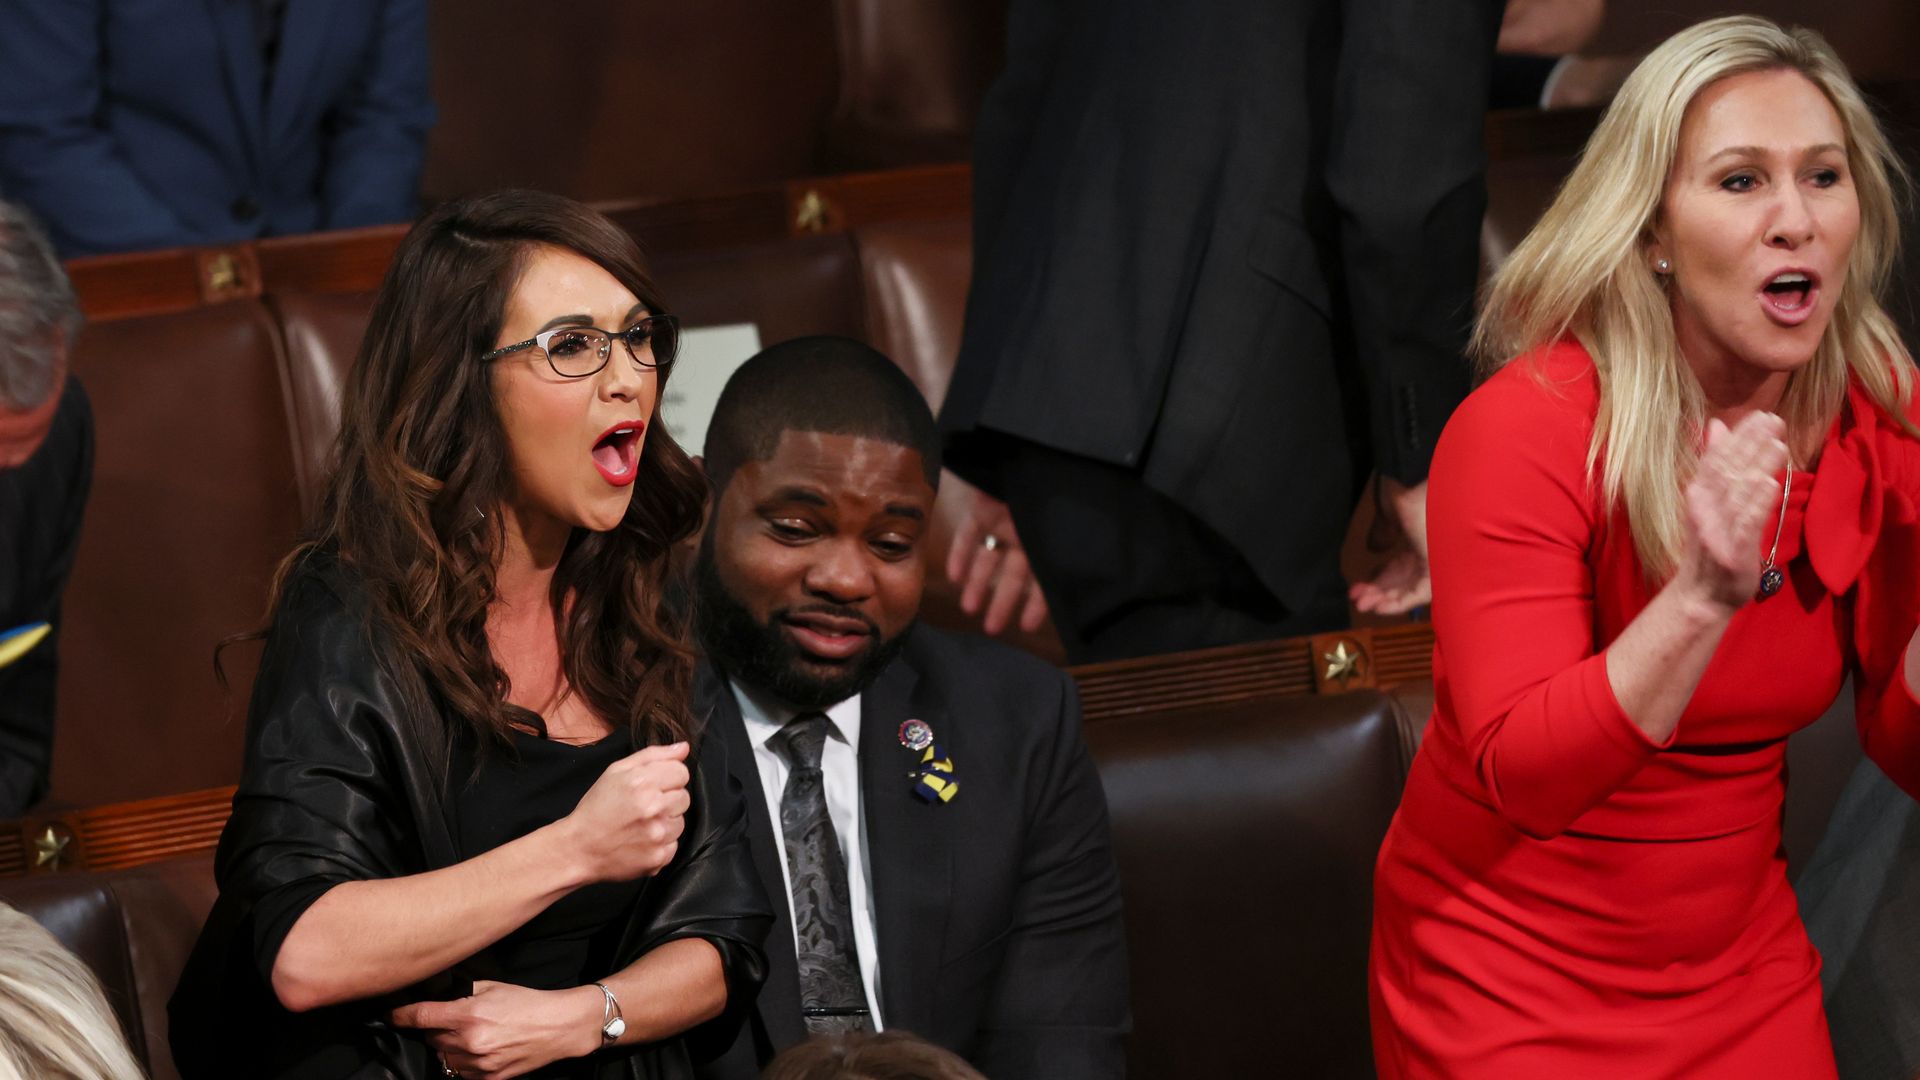 Reps. Lauren Boebert and Marjorie Taylor Greene are seen shouting during President Biden's State of the Union address.